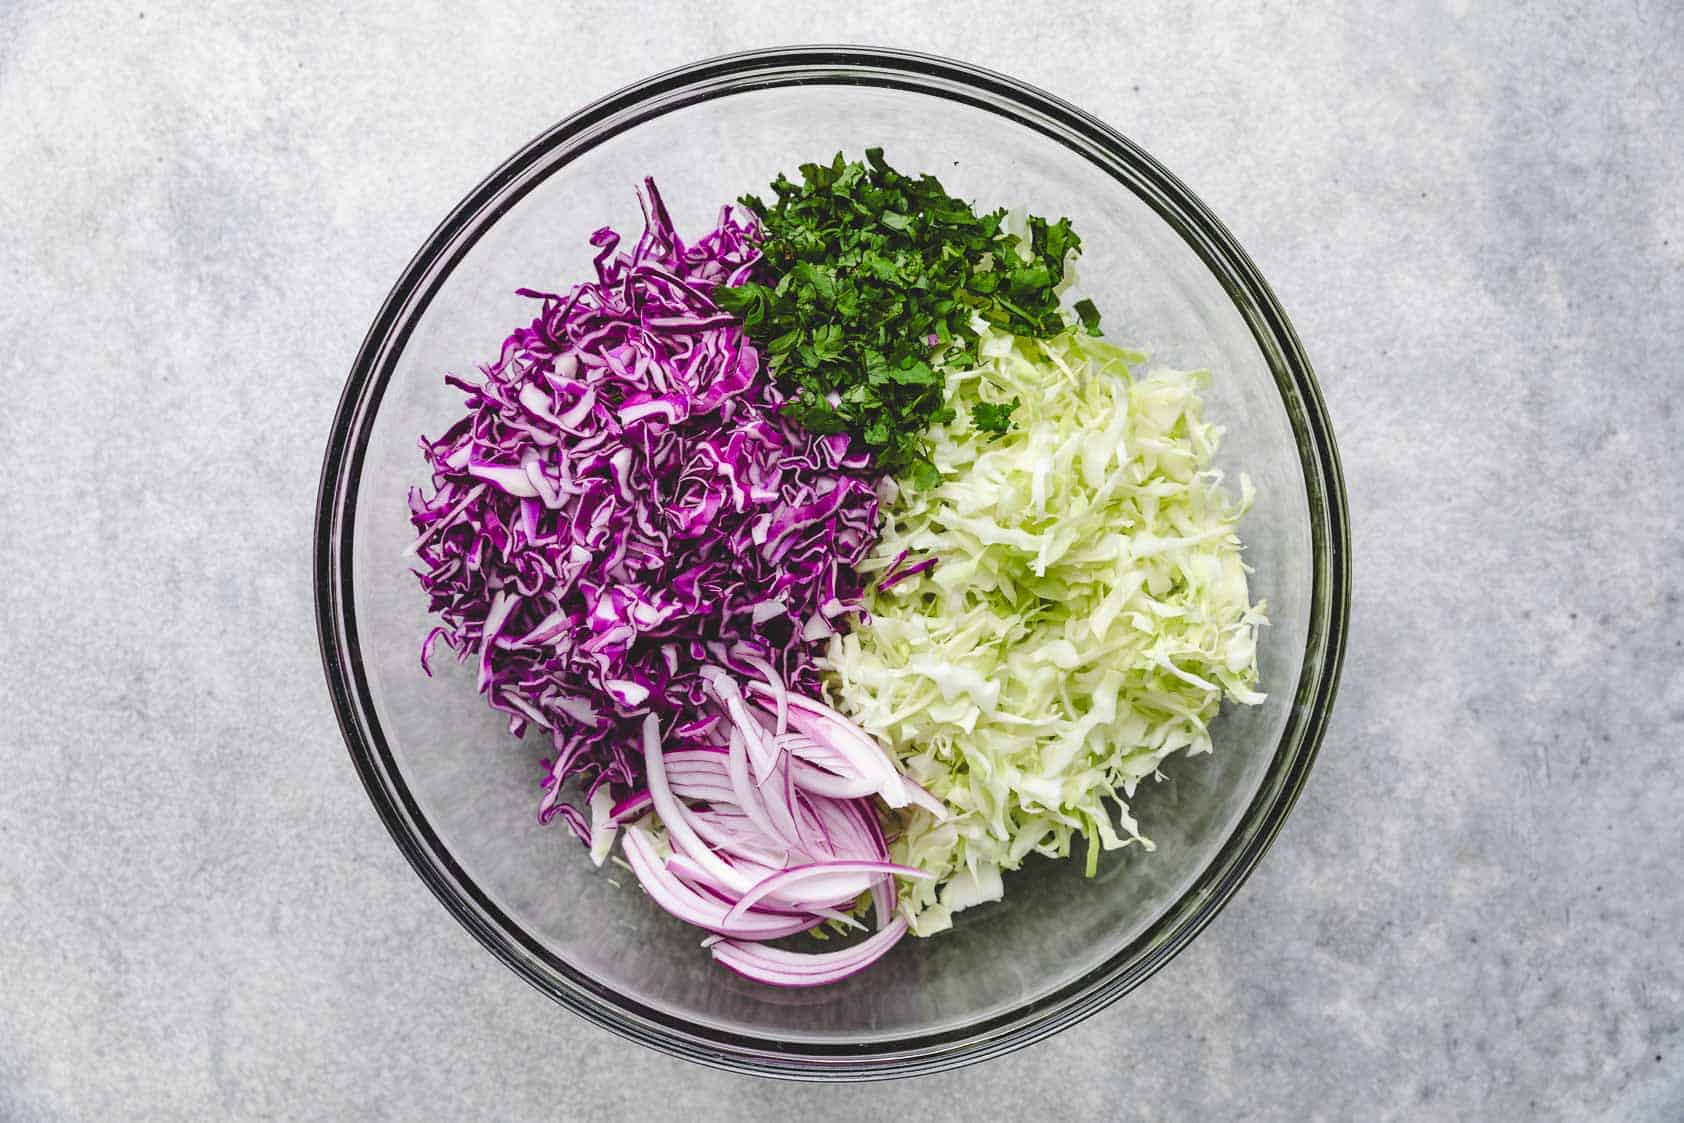 Cabbage, onions, and cilantro in a bowl.